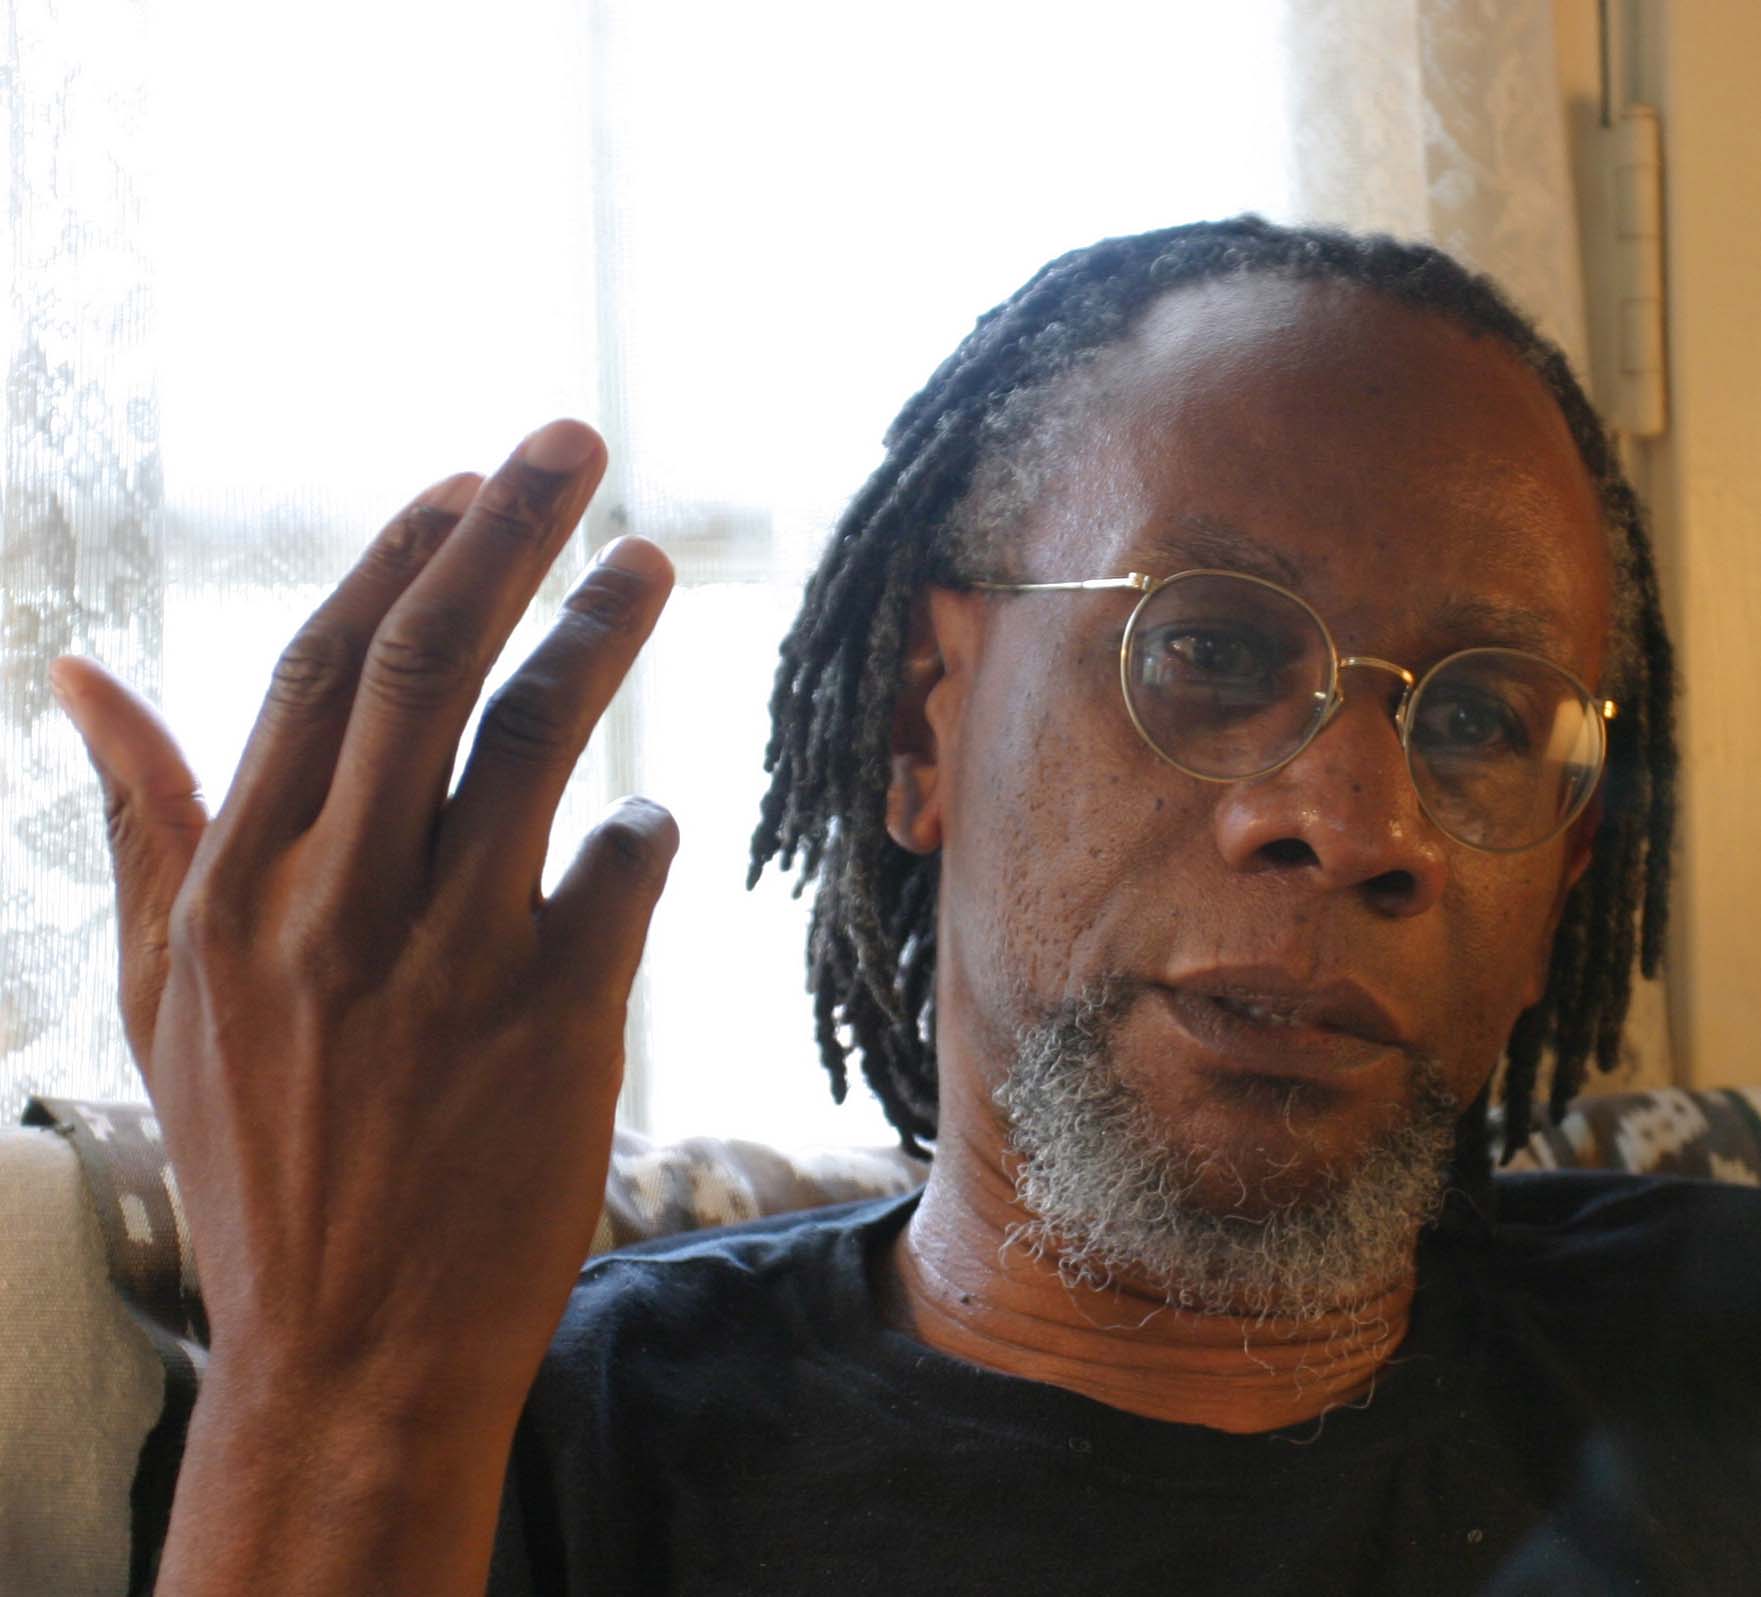 Poet Nathaniel Mackey during an interview, seated on a couch.